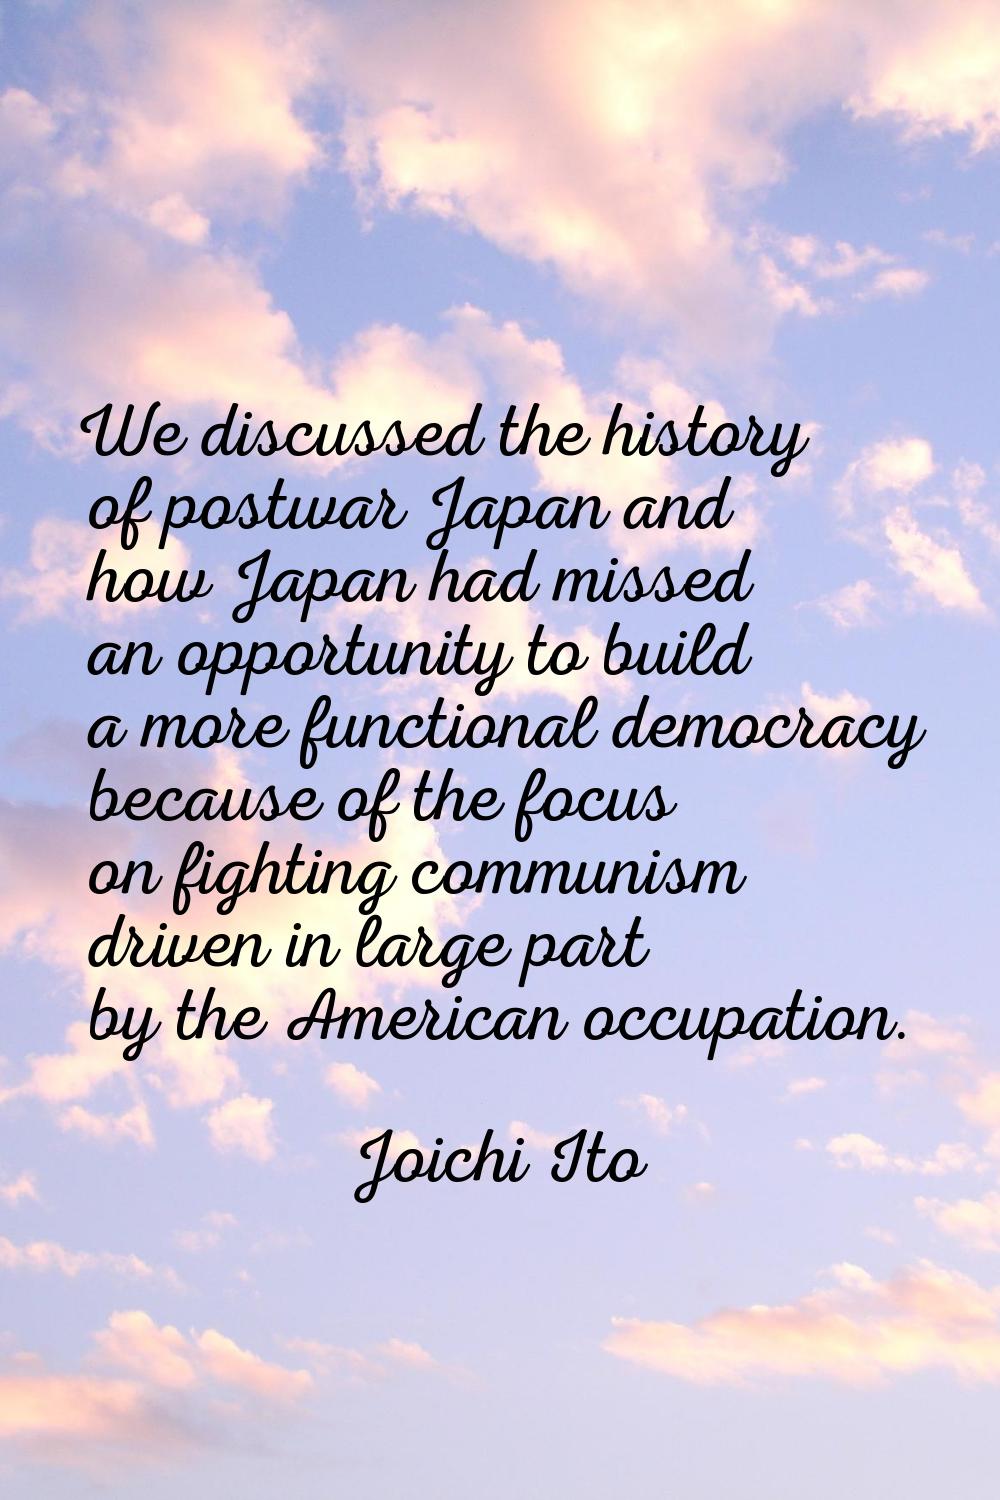 We discussed the history of postwar Japan and how Japan had missed an opportunity to build a more f